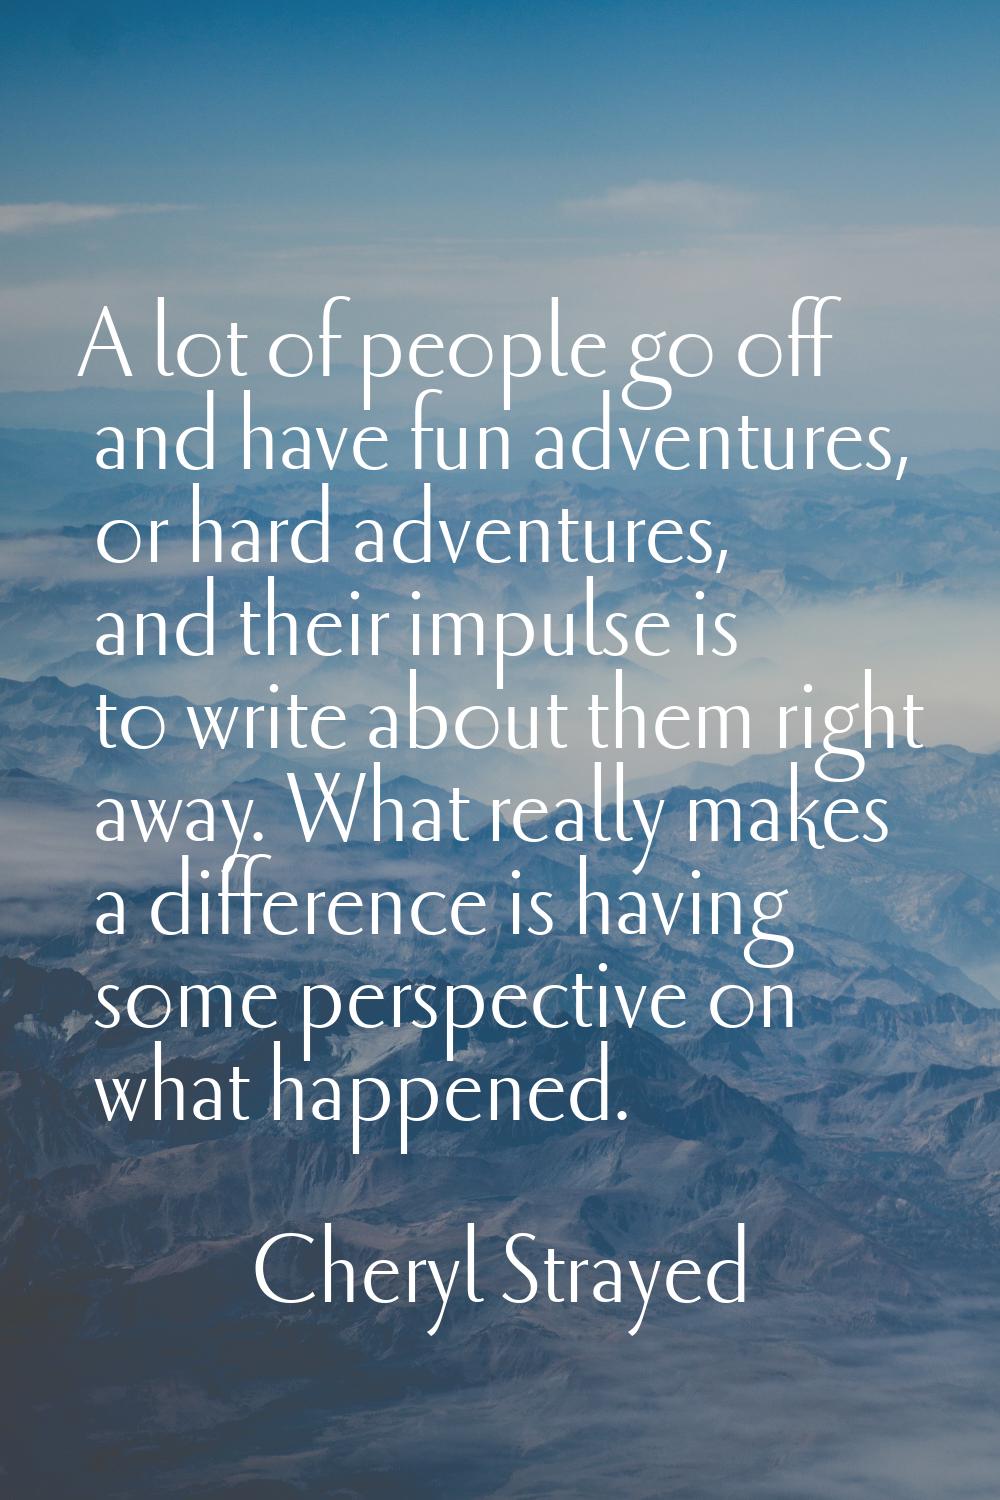 A lot of people go off and have fun adventures, or hard adventures, and their impulse is to write a